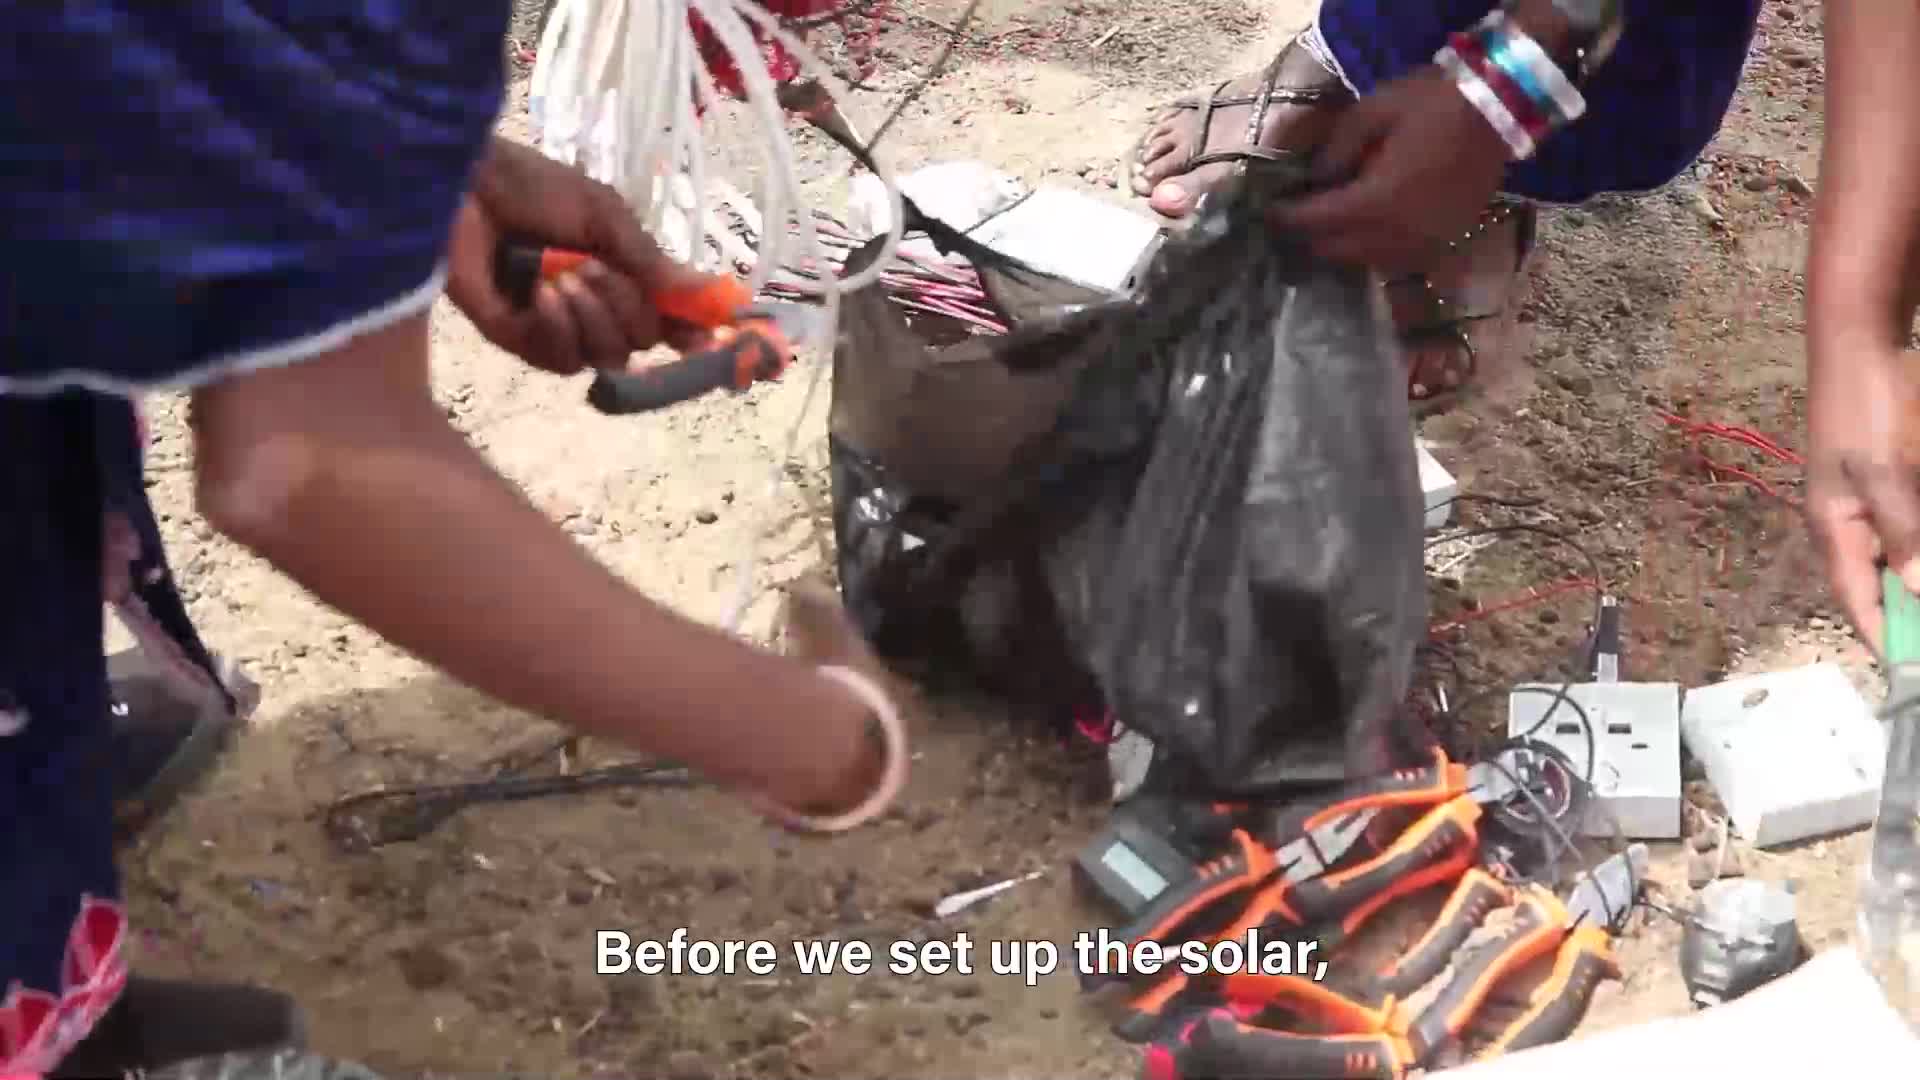 The female solar installers who brought light to Maasai